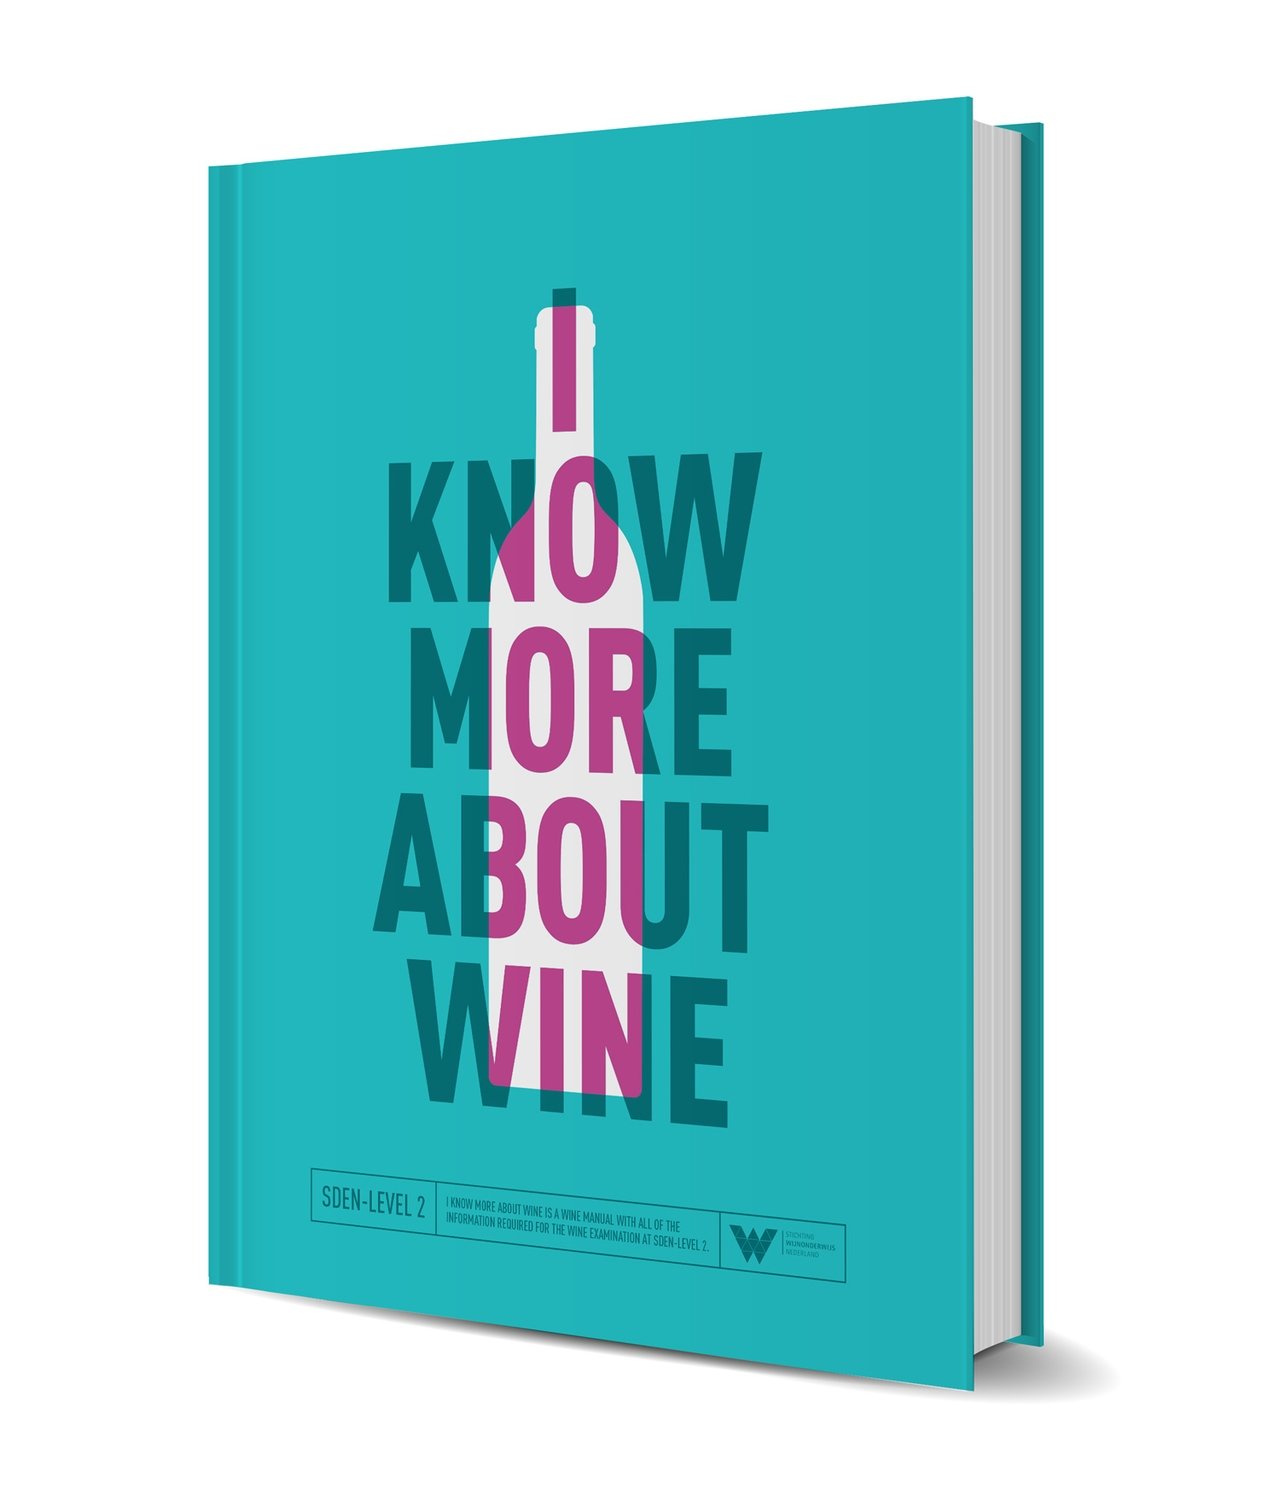 English Book: I know more about wine